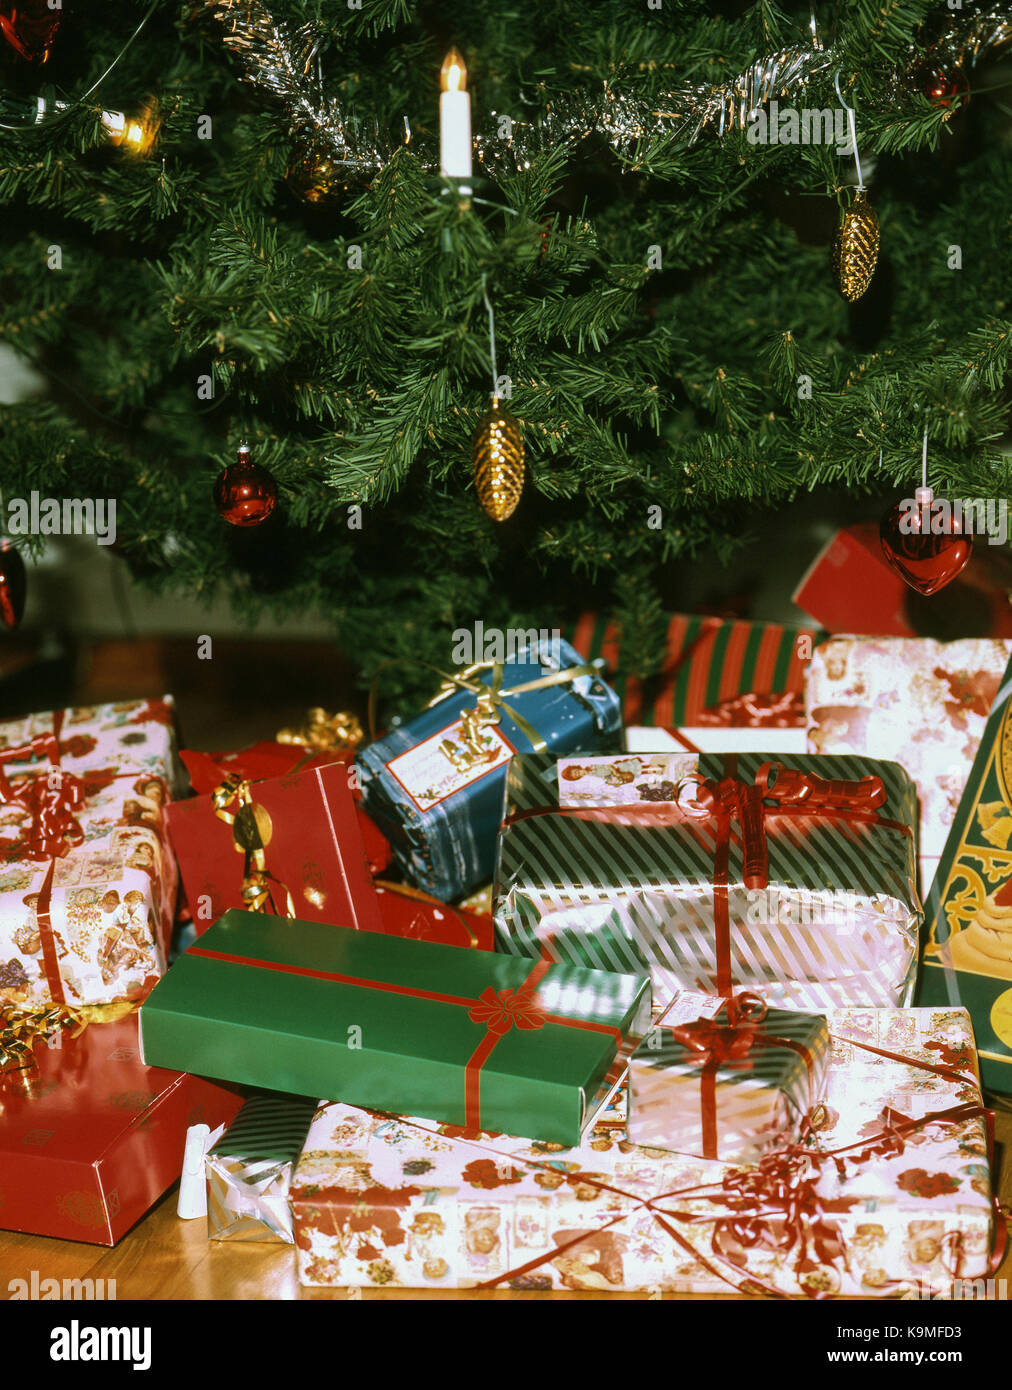 CHRISTMAS PACKAGE under the Christmas tree 2015 Stock Photo